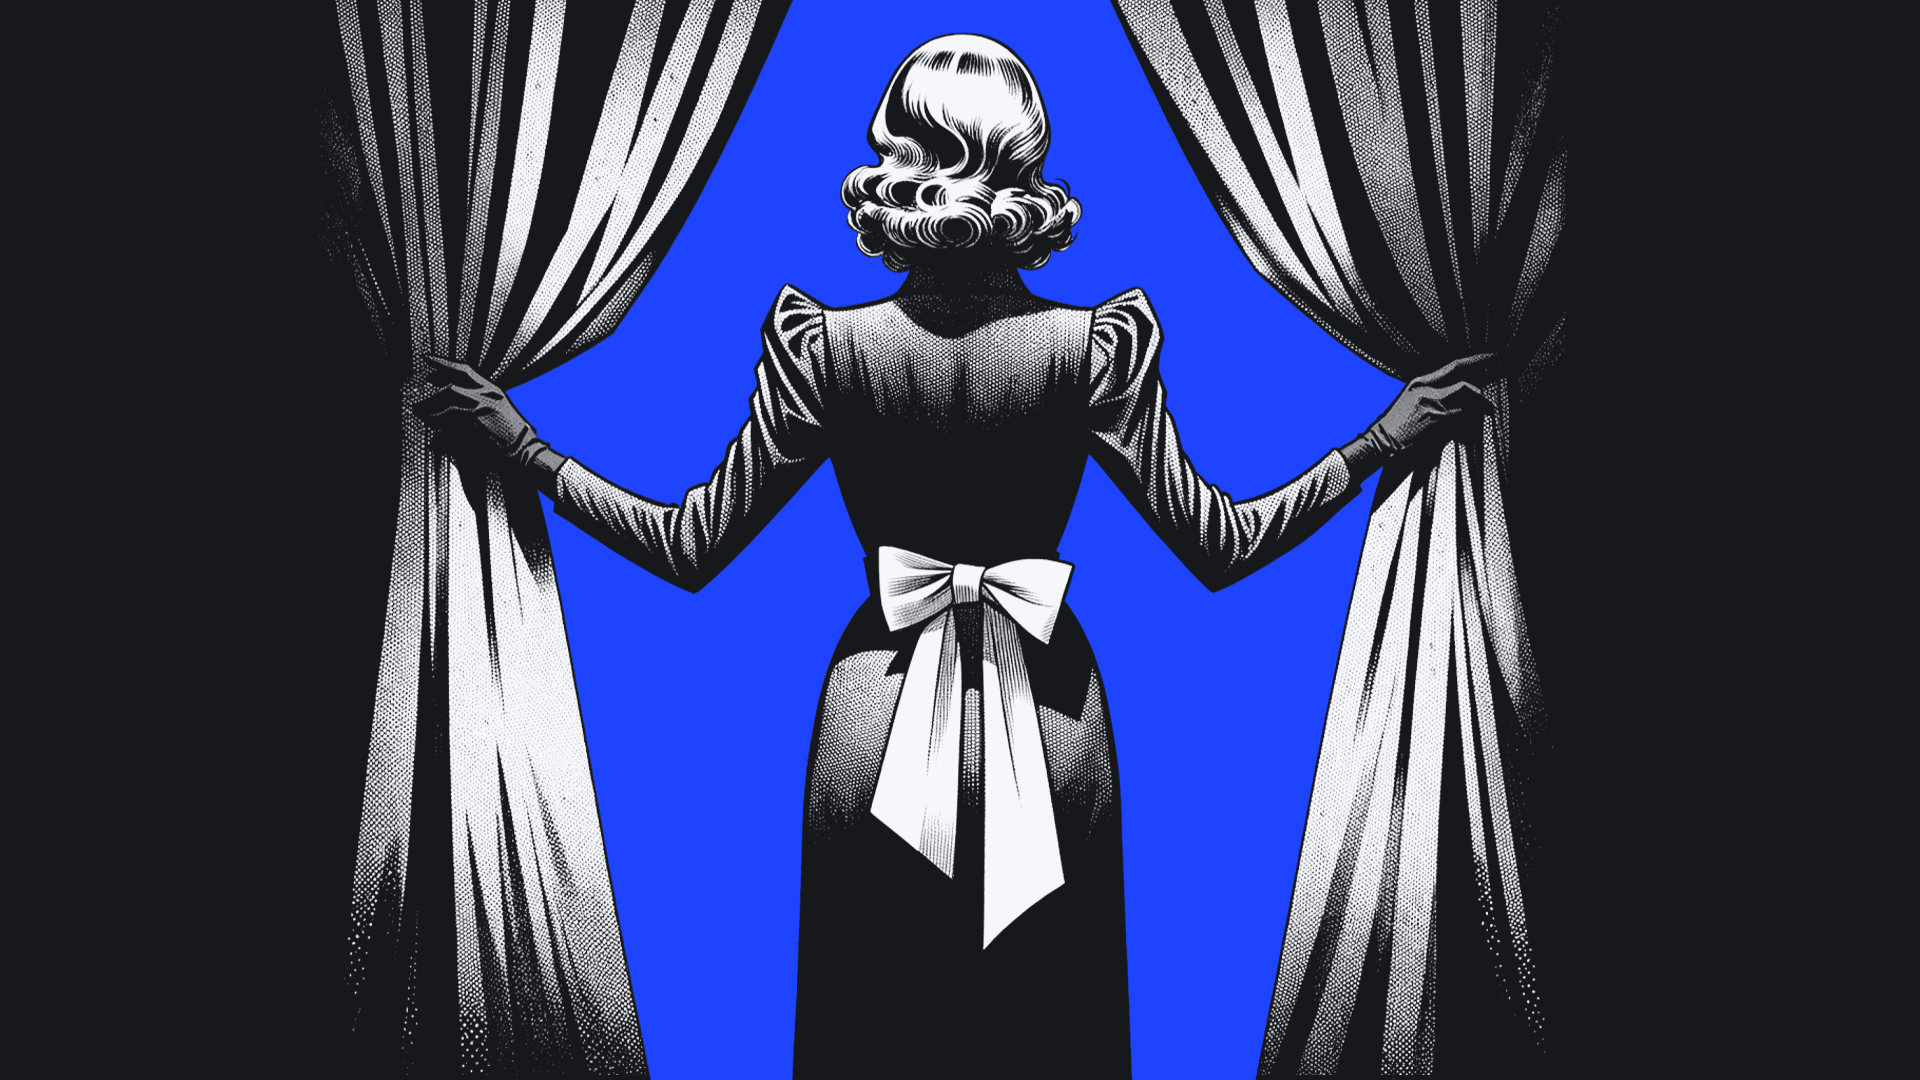 A stylized black and white illustration of a woman opening stage curtains against a blue background.